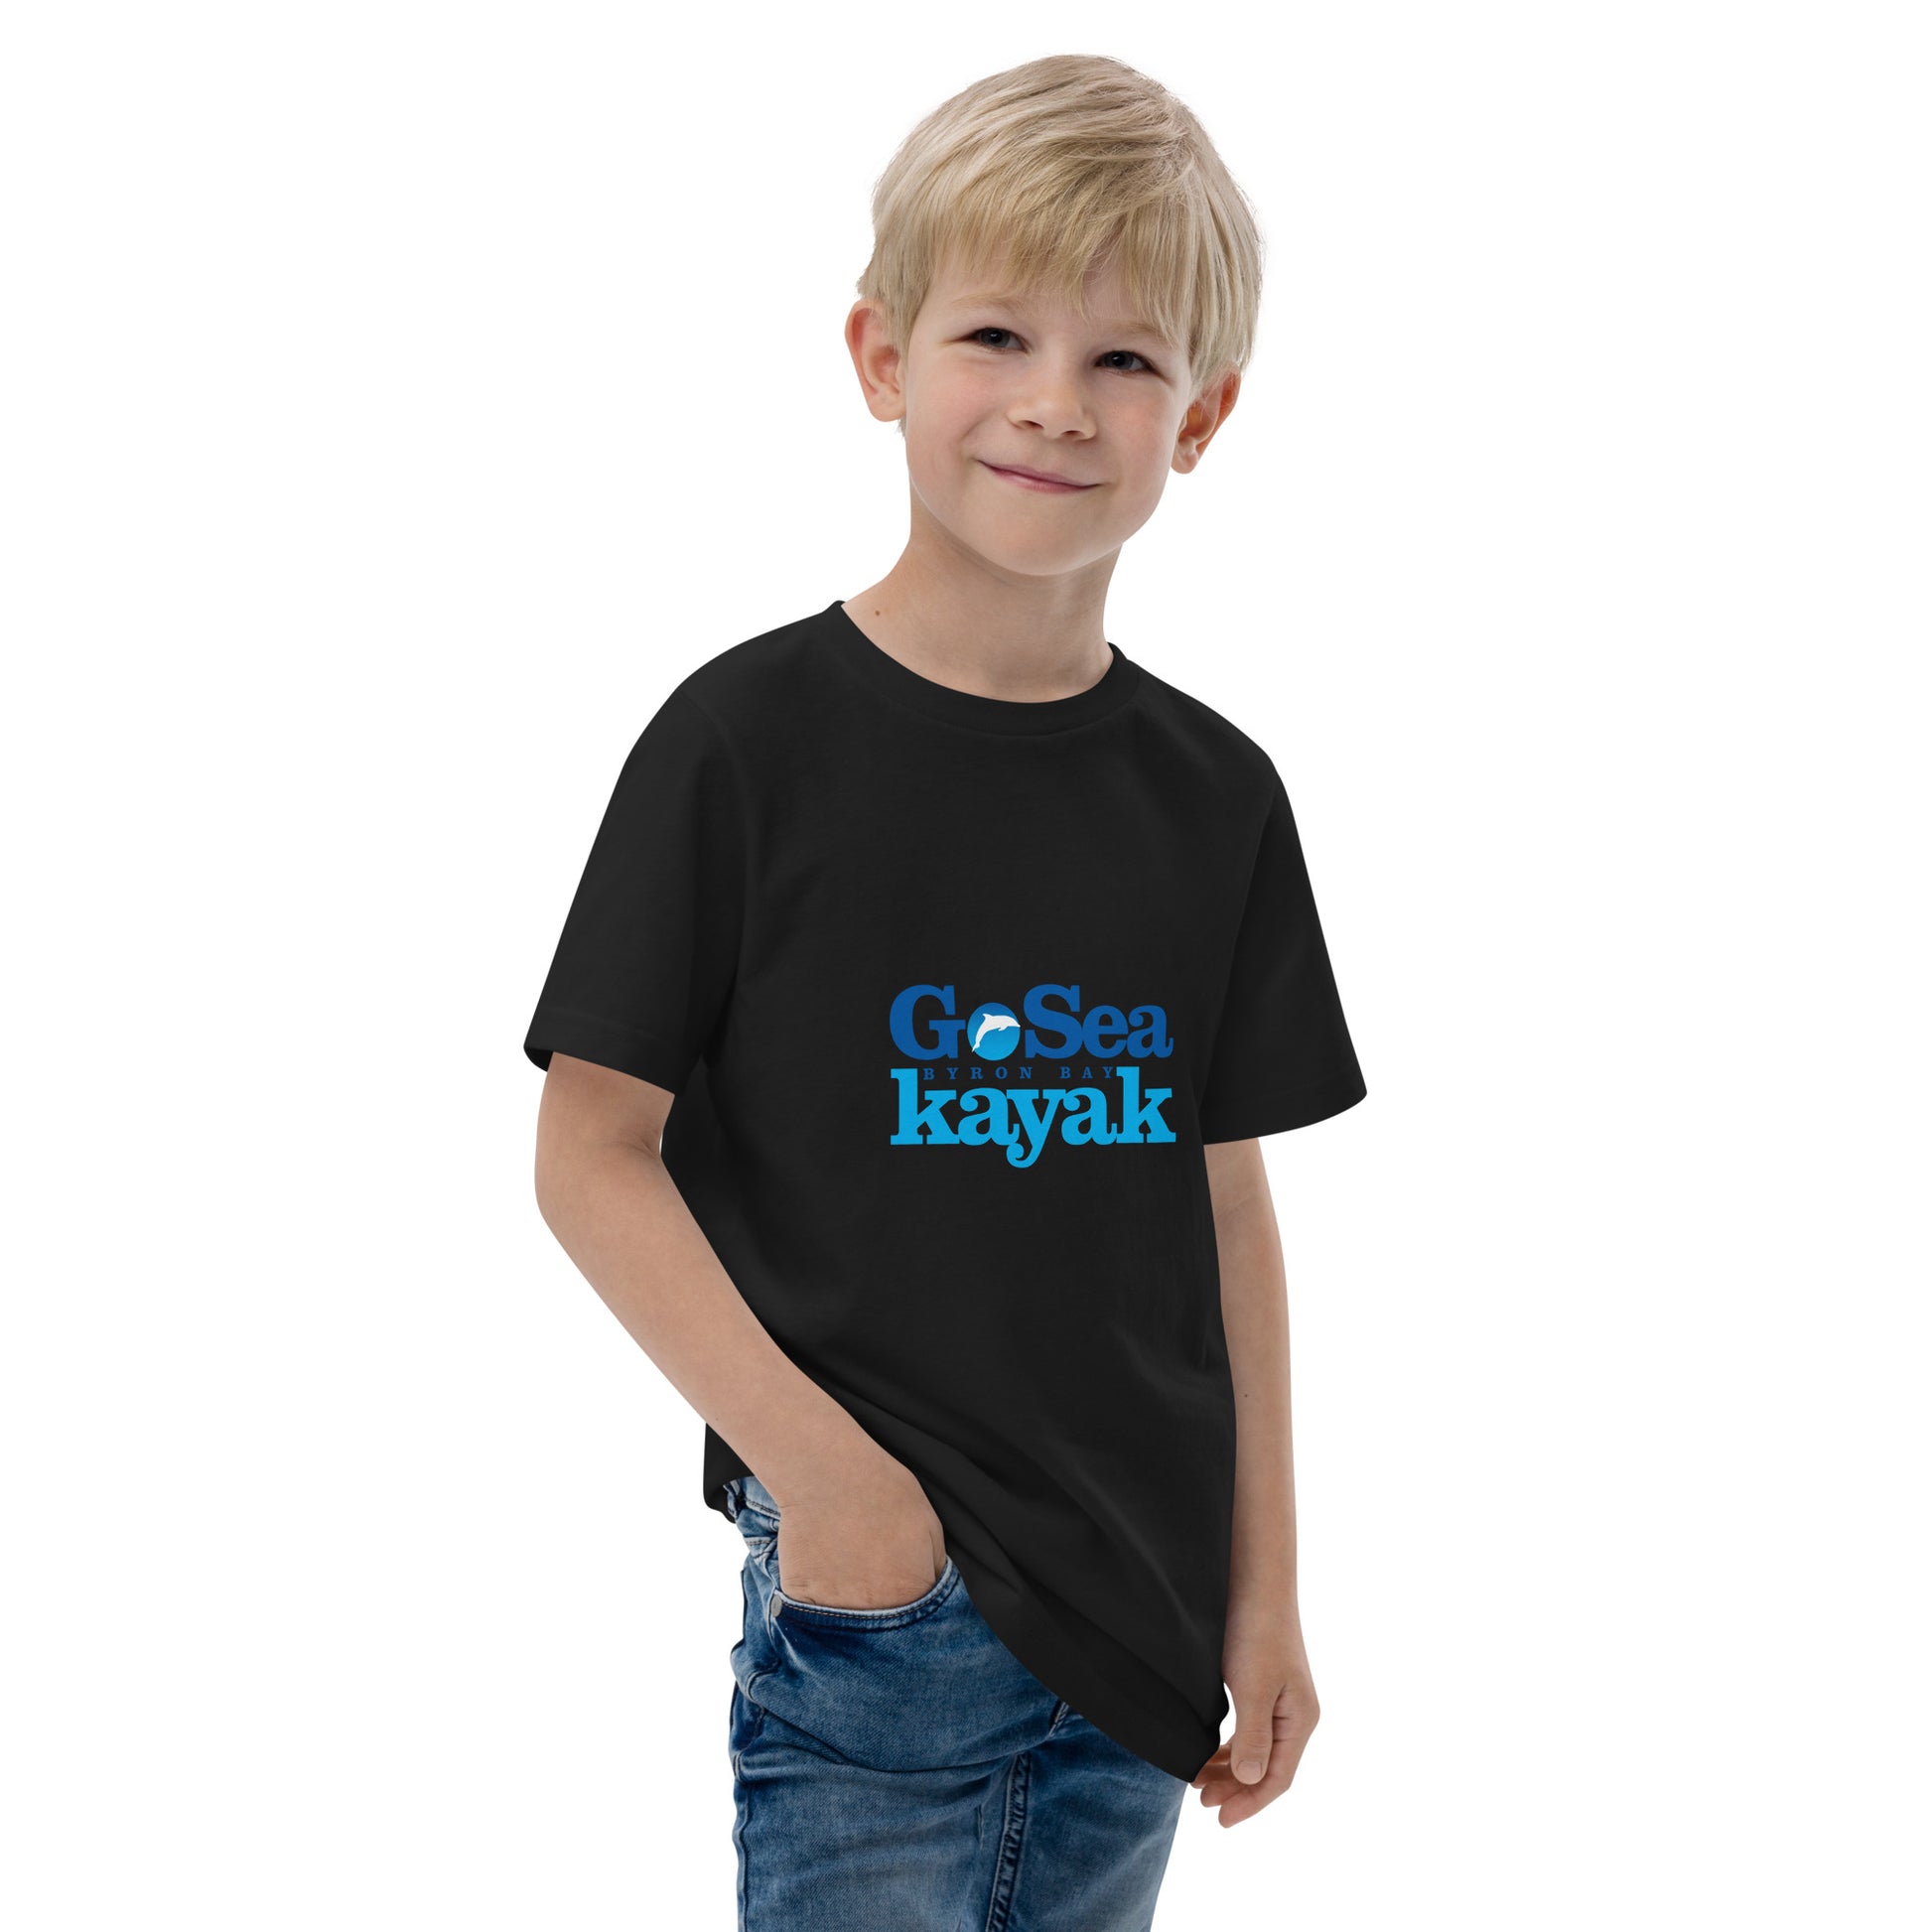  Kids T-Shirt - Black  - Front view, being warn on boy standing with a hand in his pocket - Go Sea Kayak Byron Bay logo on front - Genuine Byron Bay Merchandise | Produced by Go Sea Kayak Byron Bay 